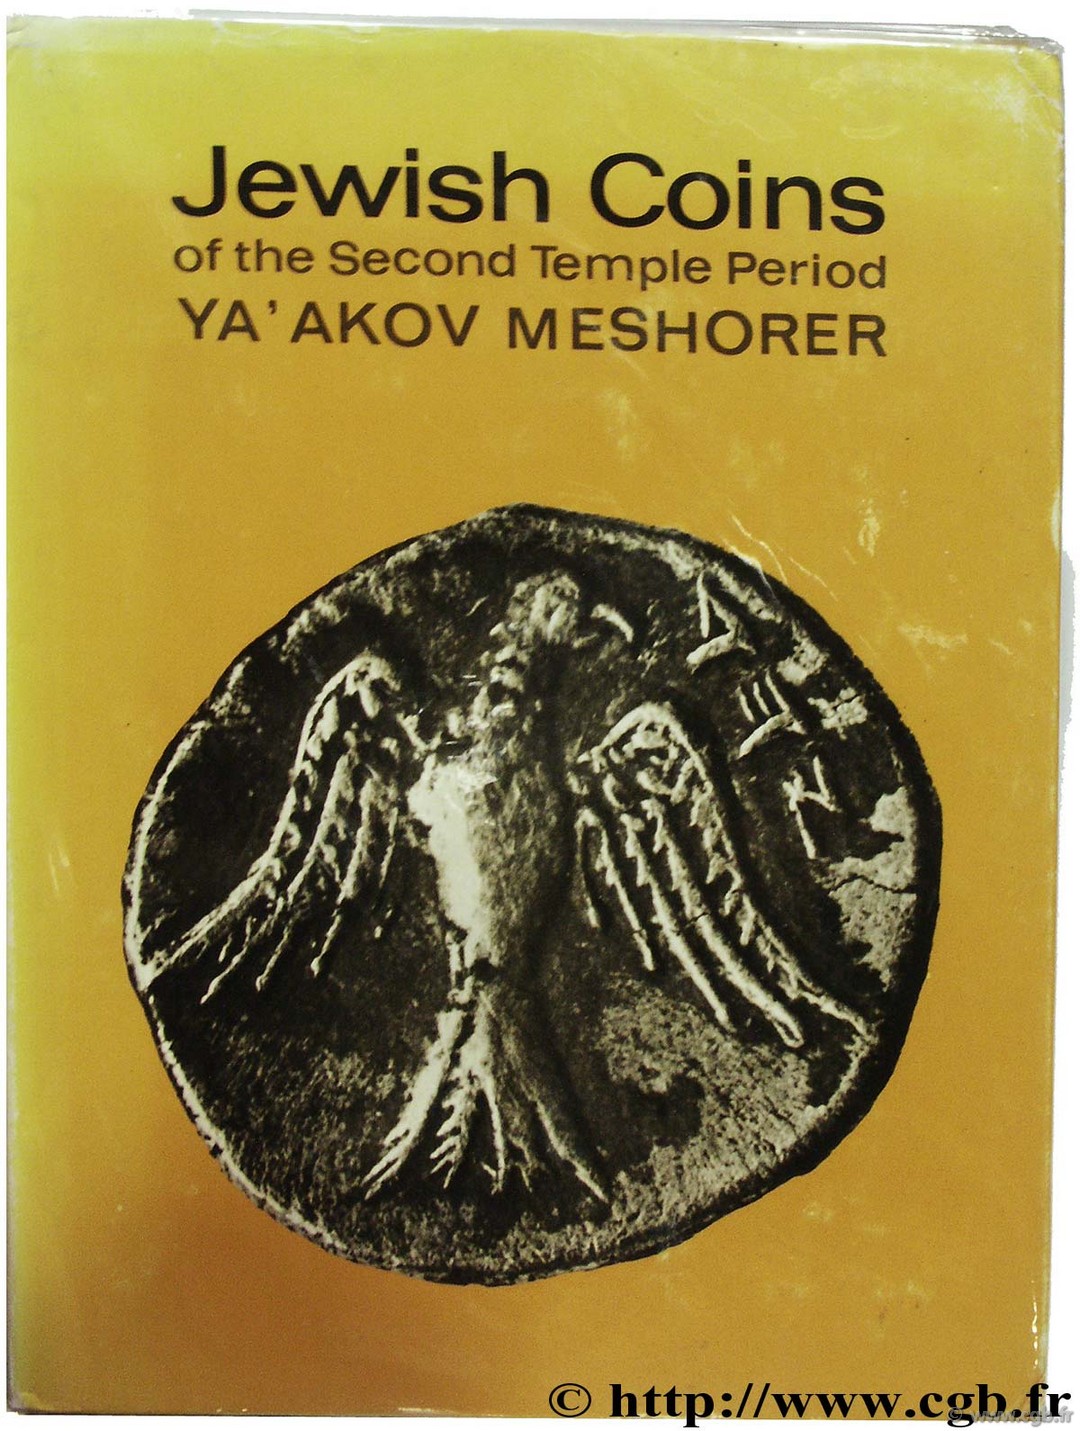 Jewish Coins of the Second Temple Period MESHORER Y.